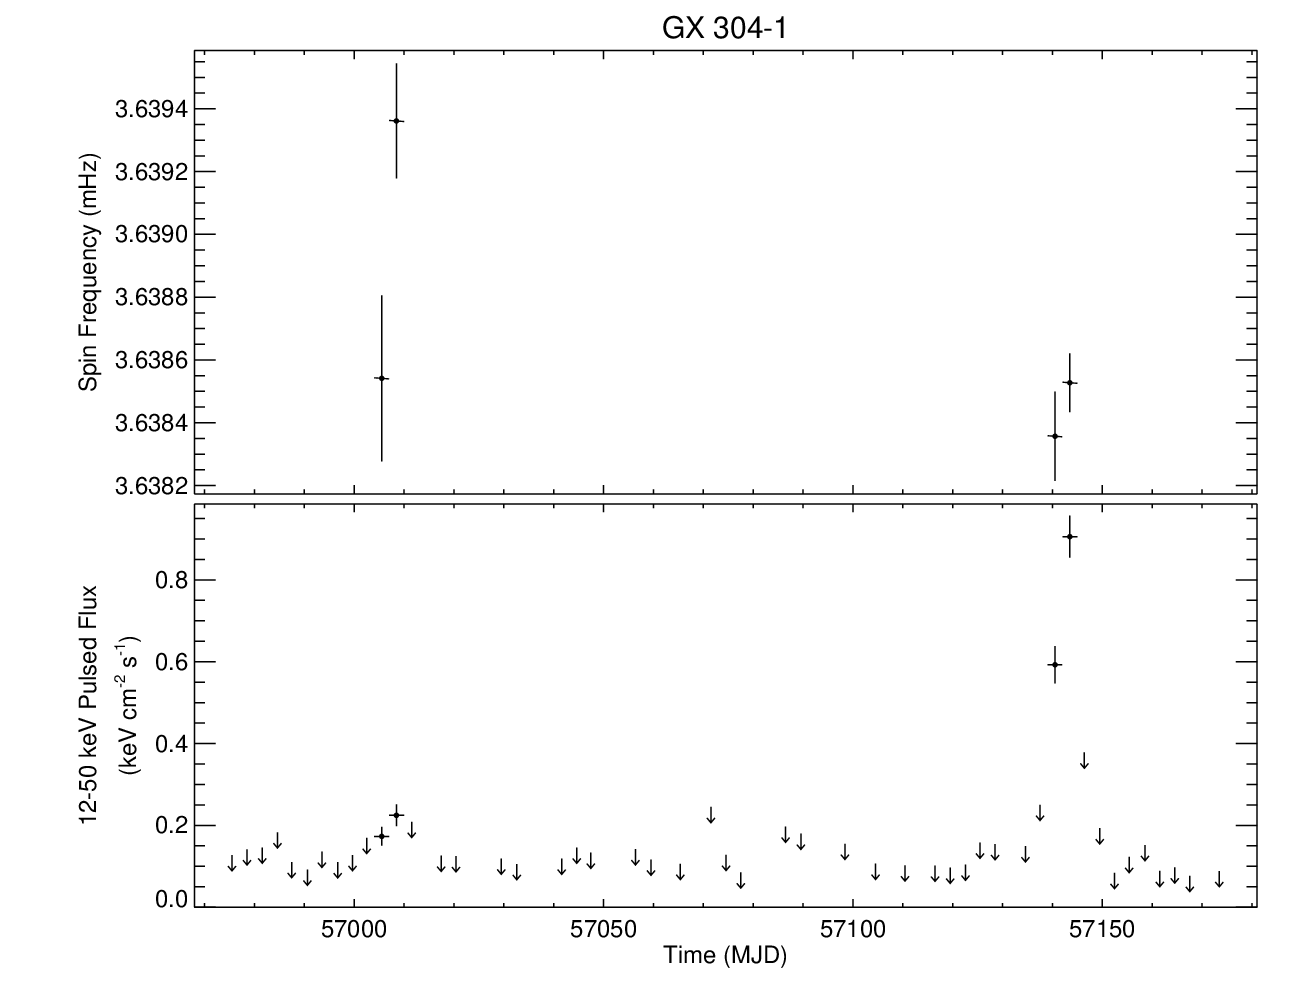 GX 304-1 Short Frequency History